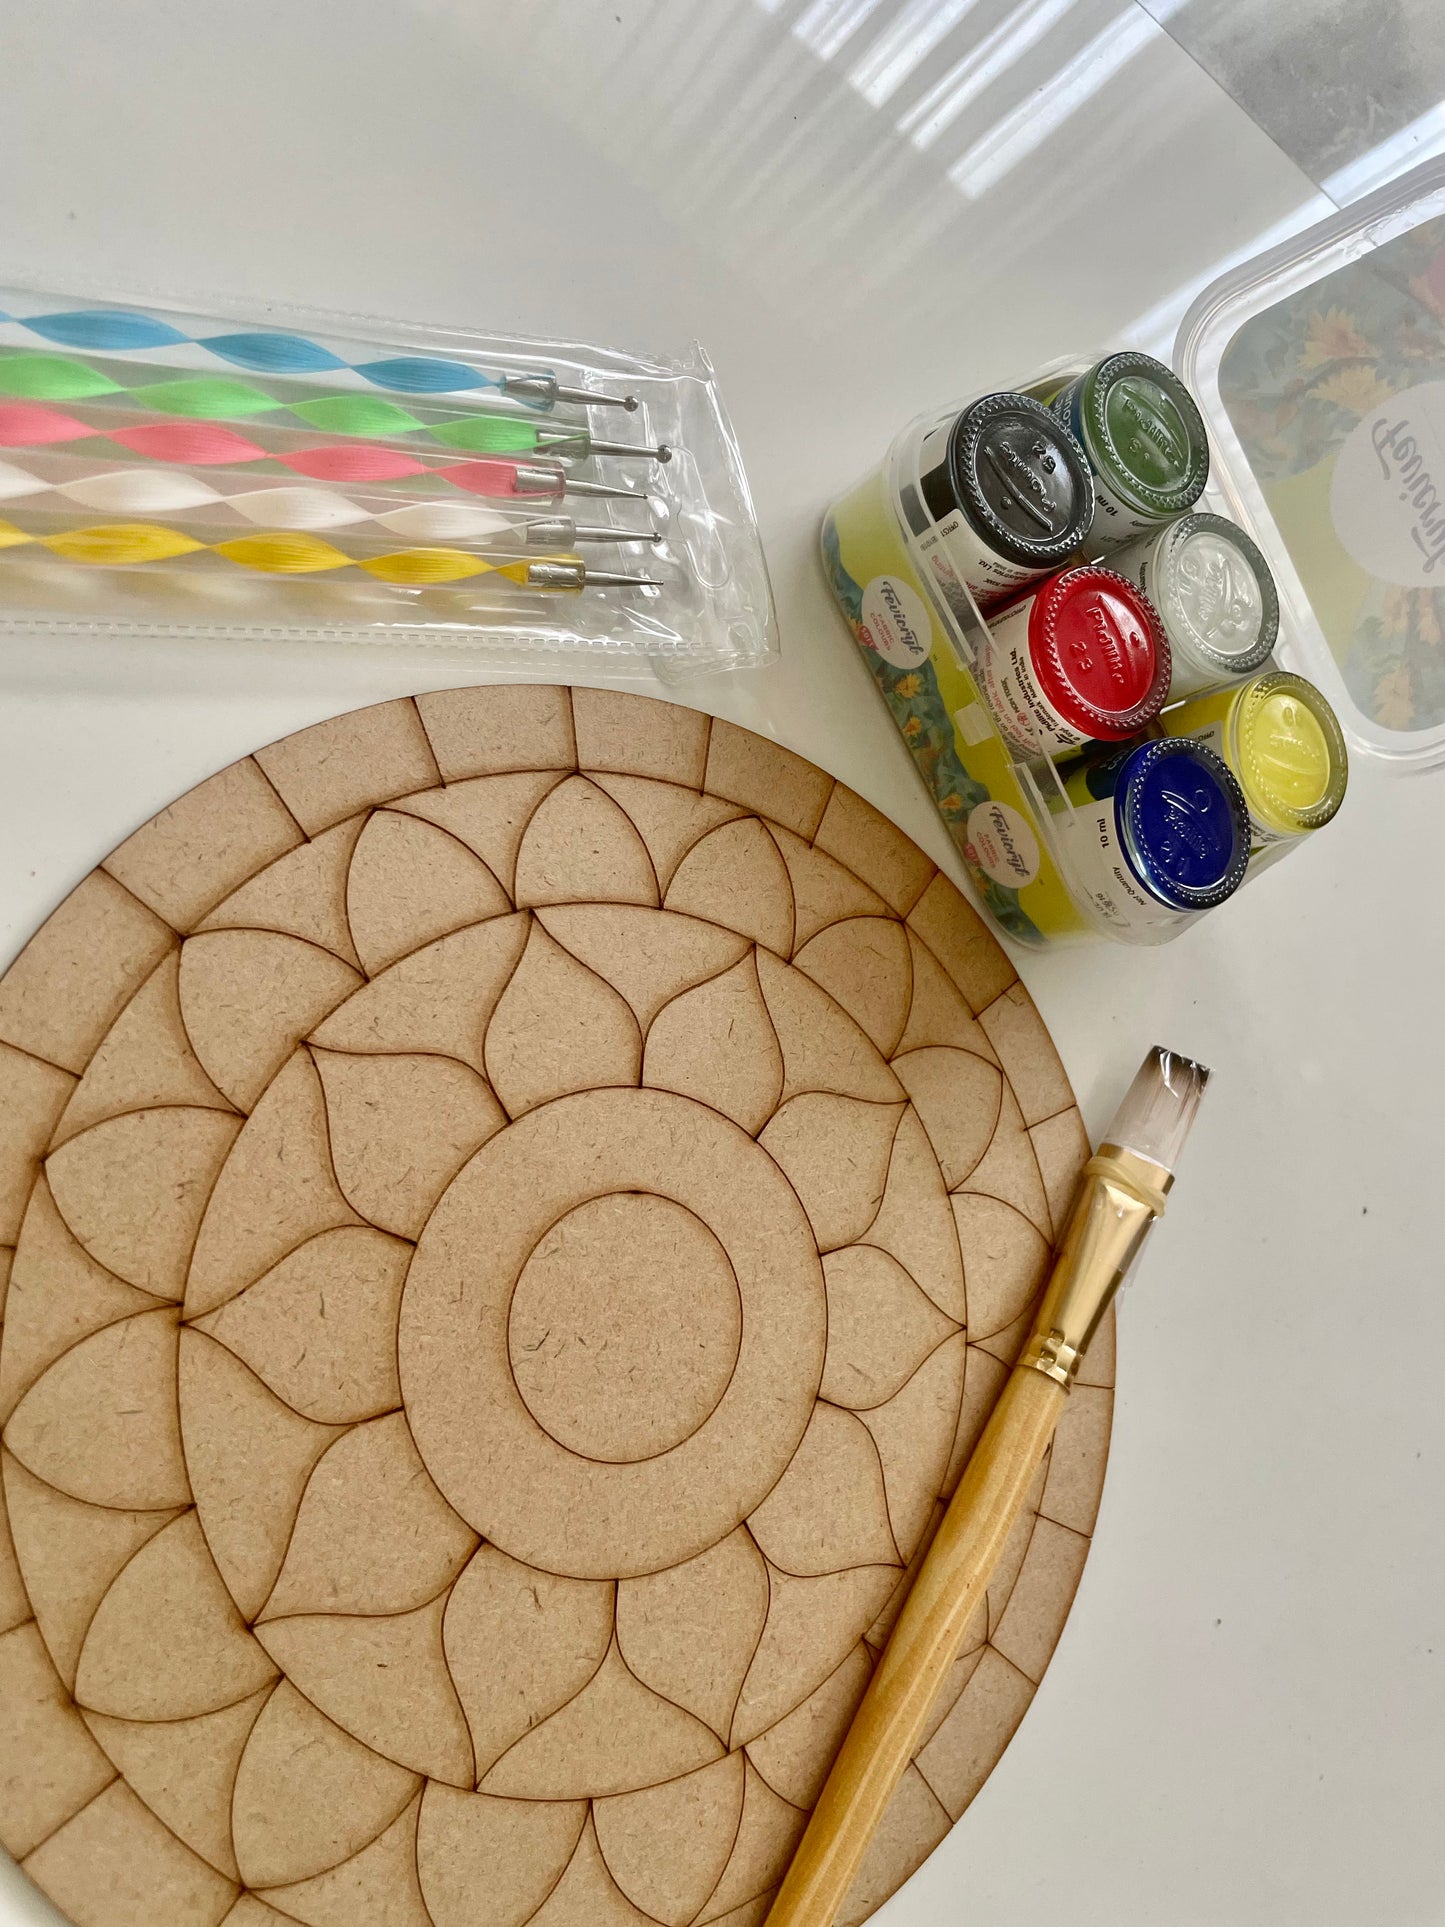 Paint Cafe Mandala dot painting pre marked art kit includes 8inch mdf board, paint, brush, dot tools.